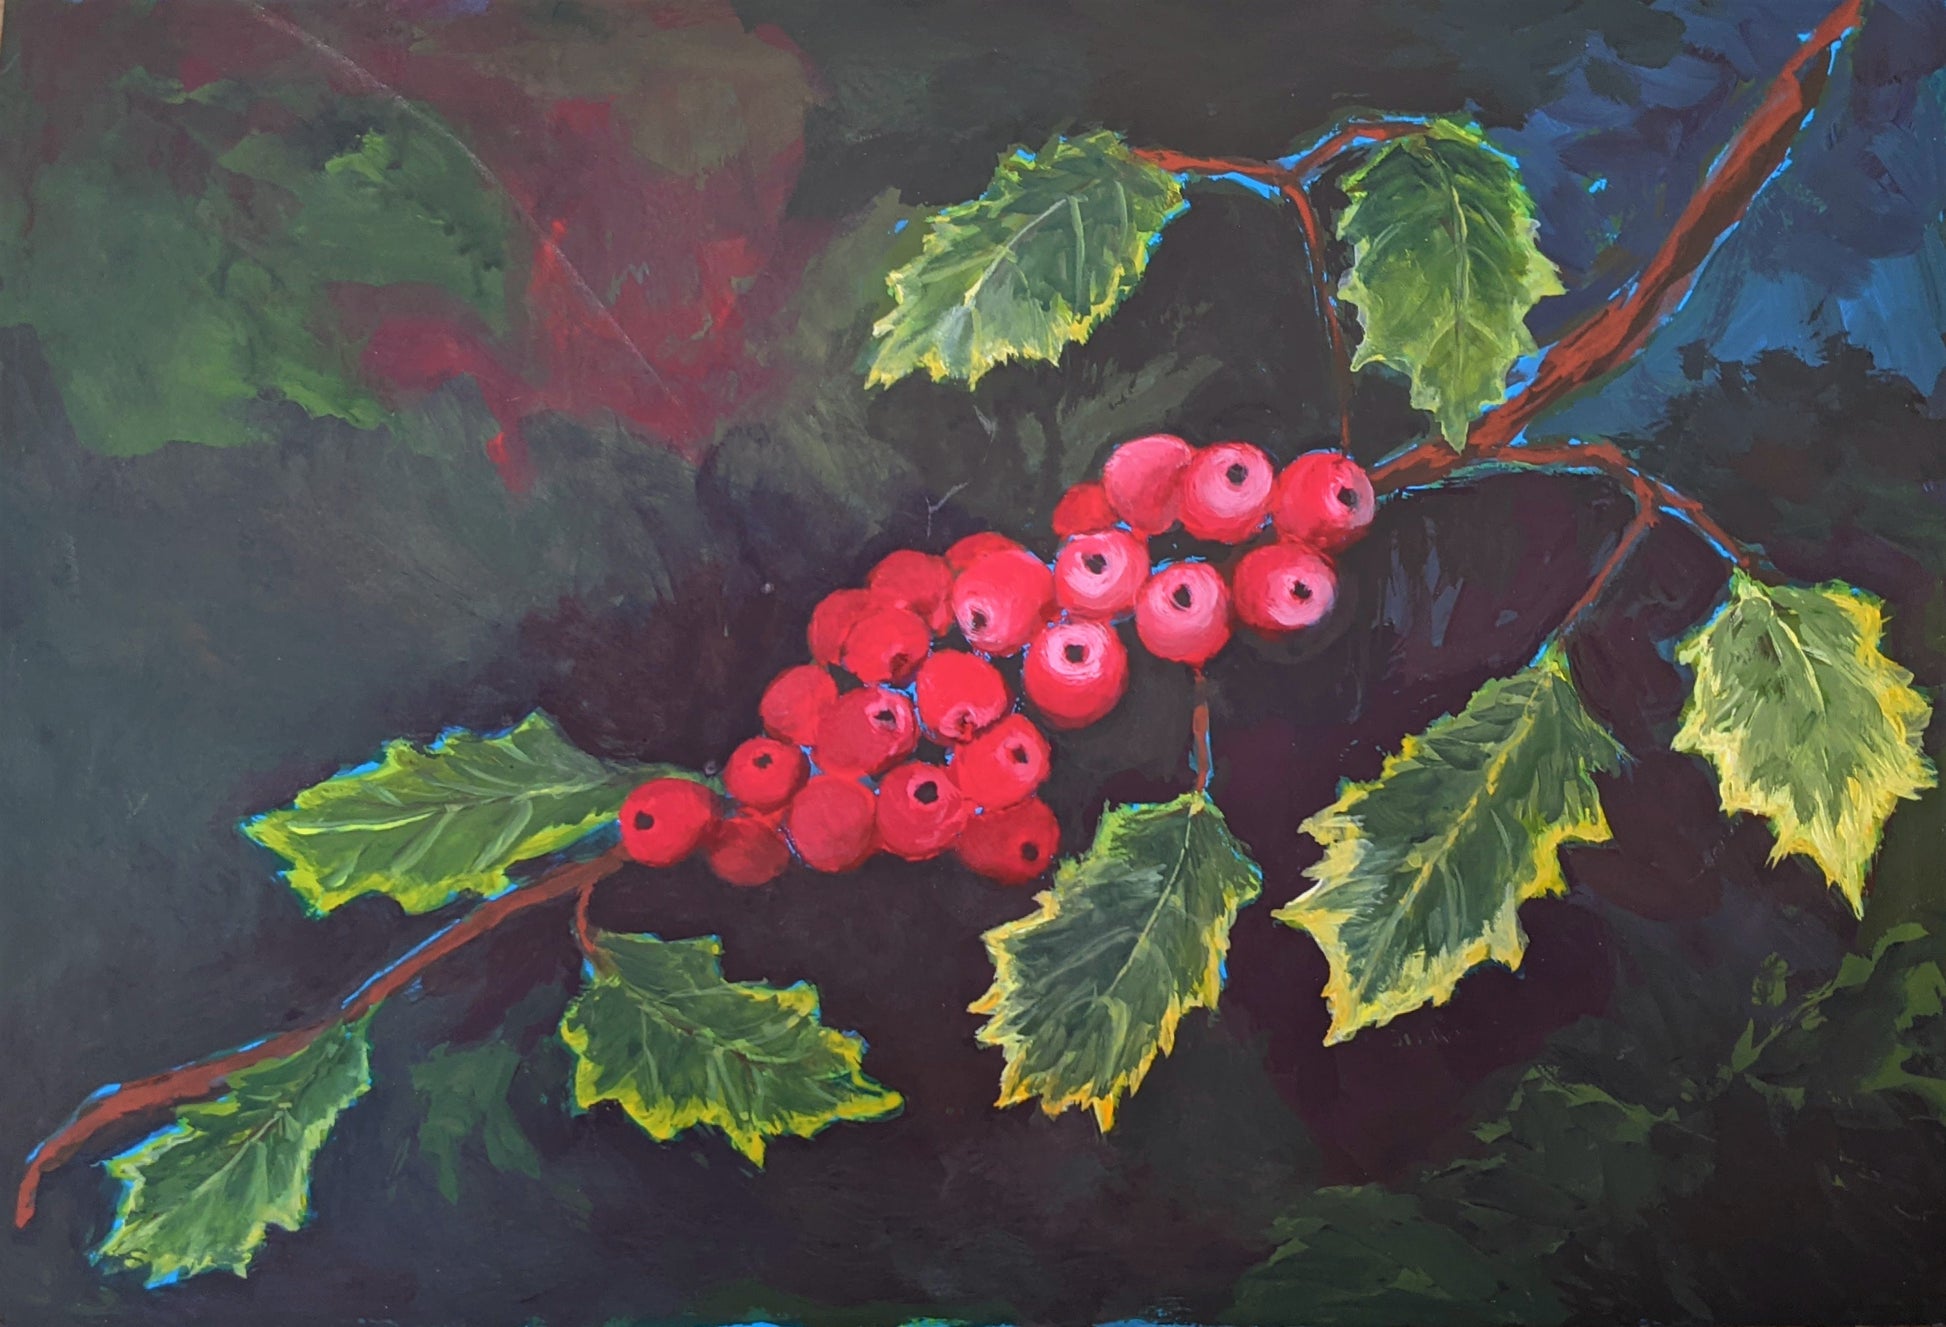 Holly Branch flashe acrylic painting on paper